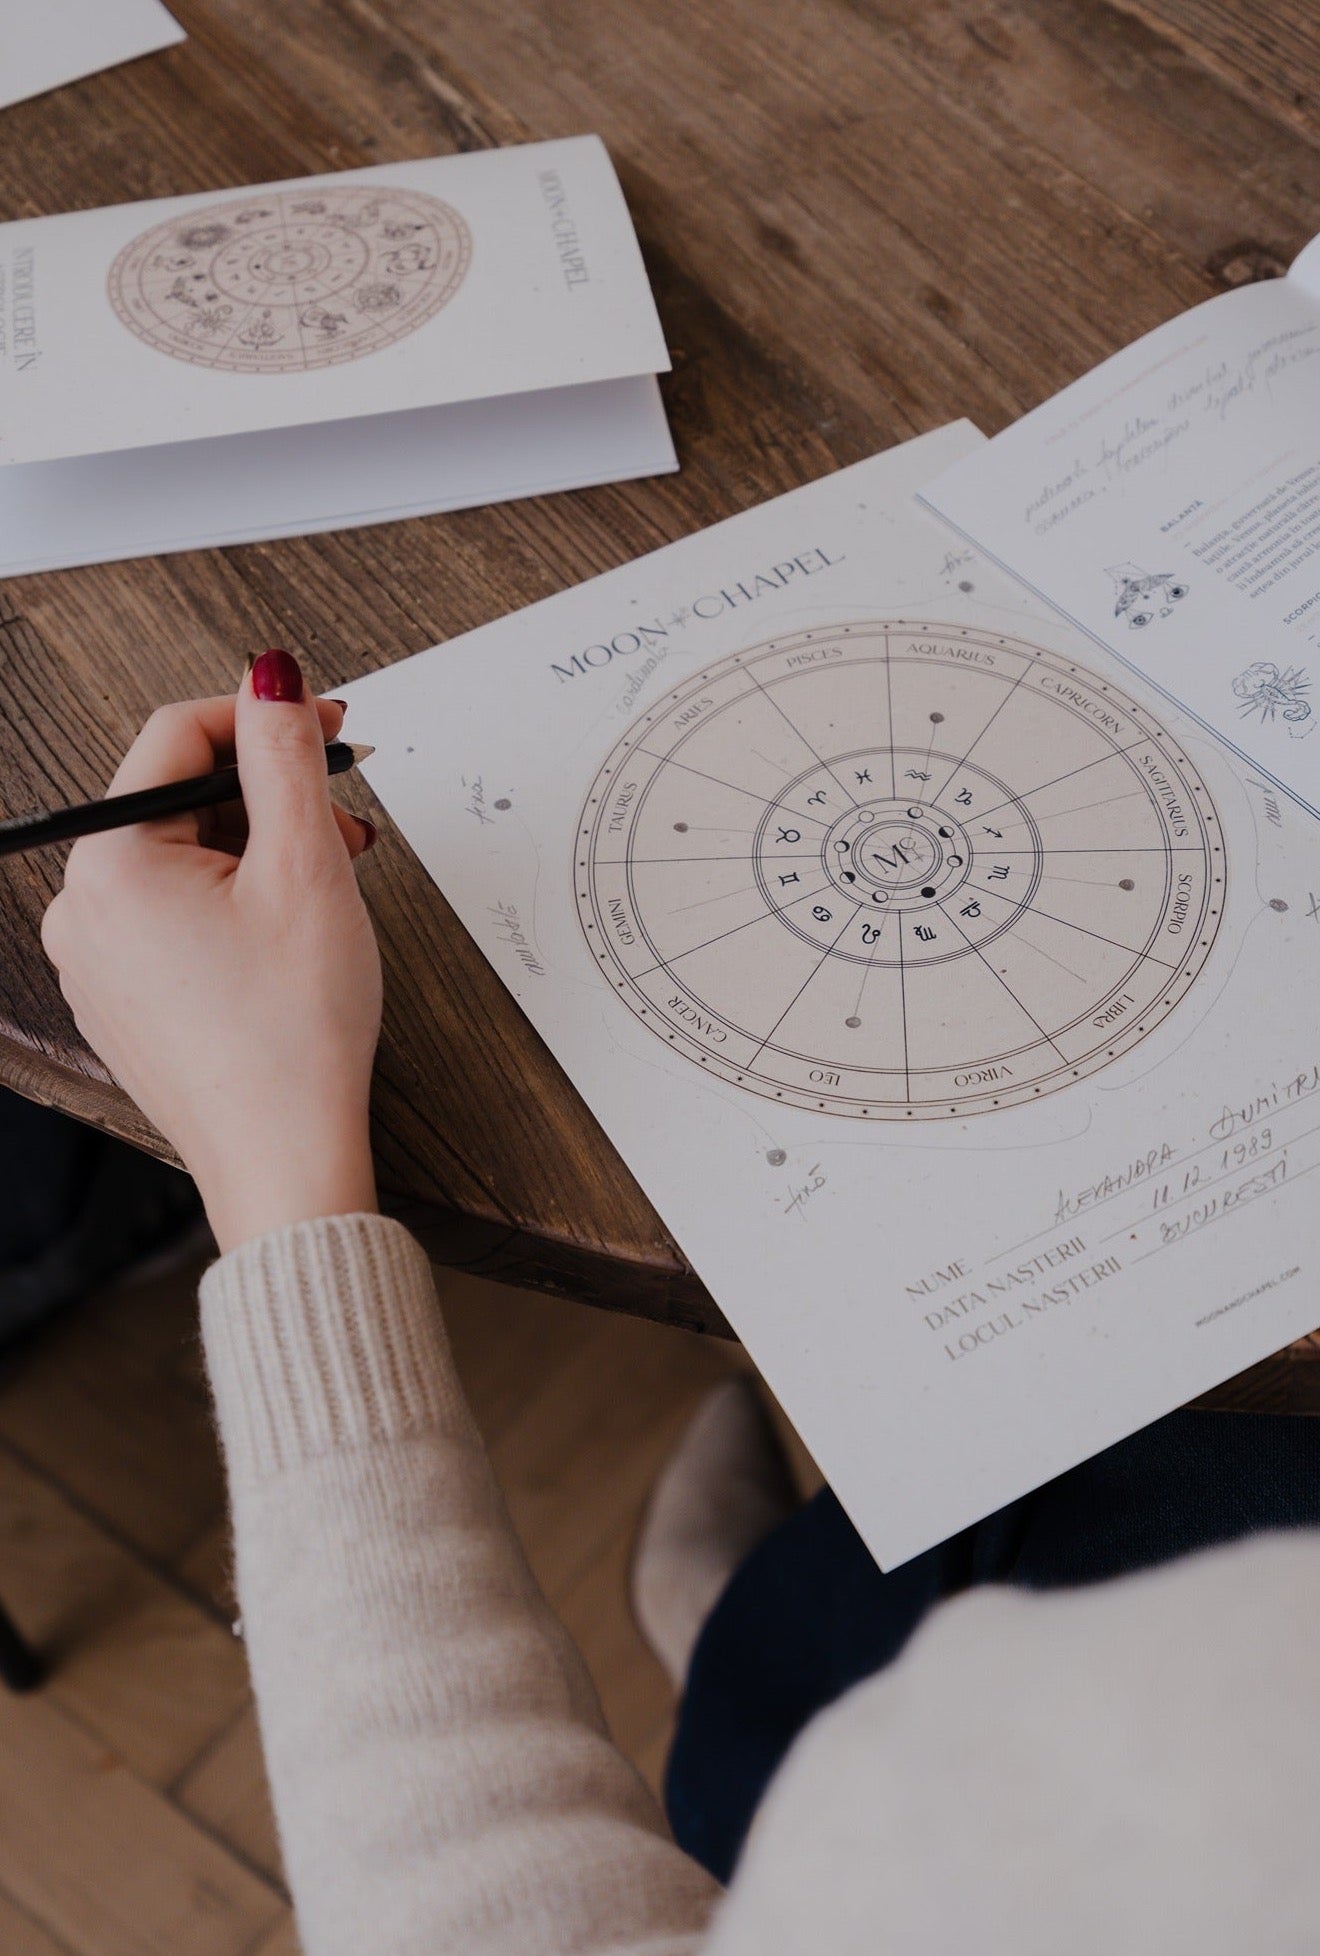 Workshop: Astrology and Natal Chart Reading